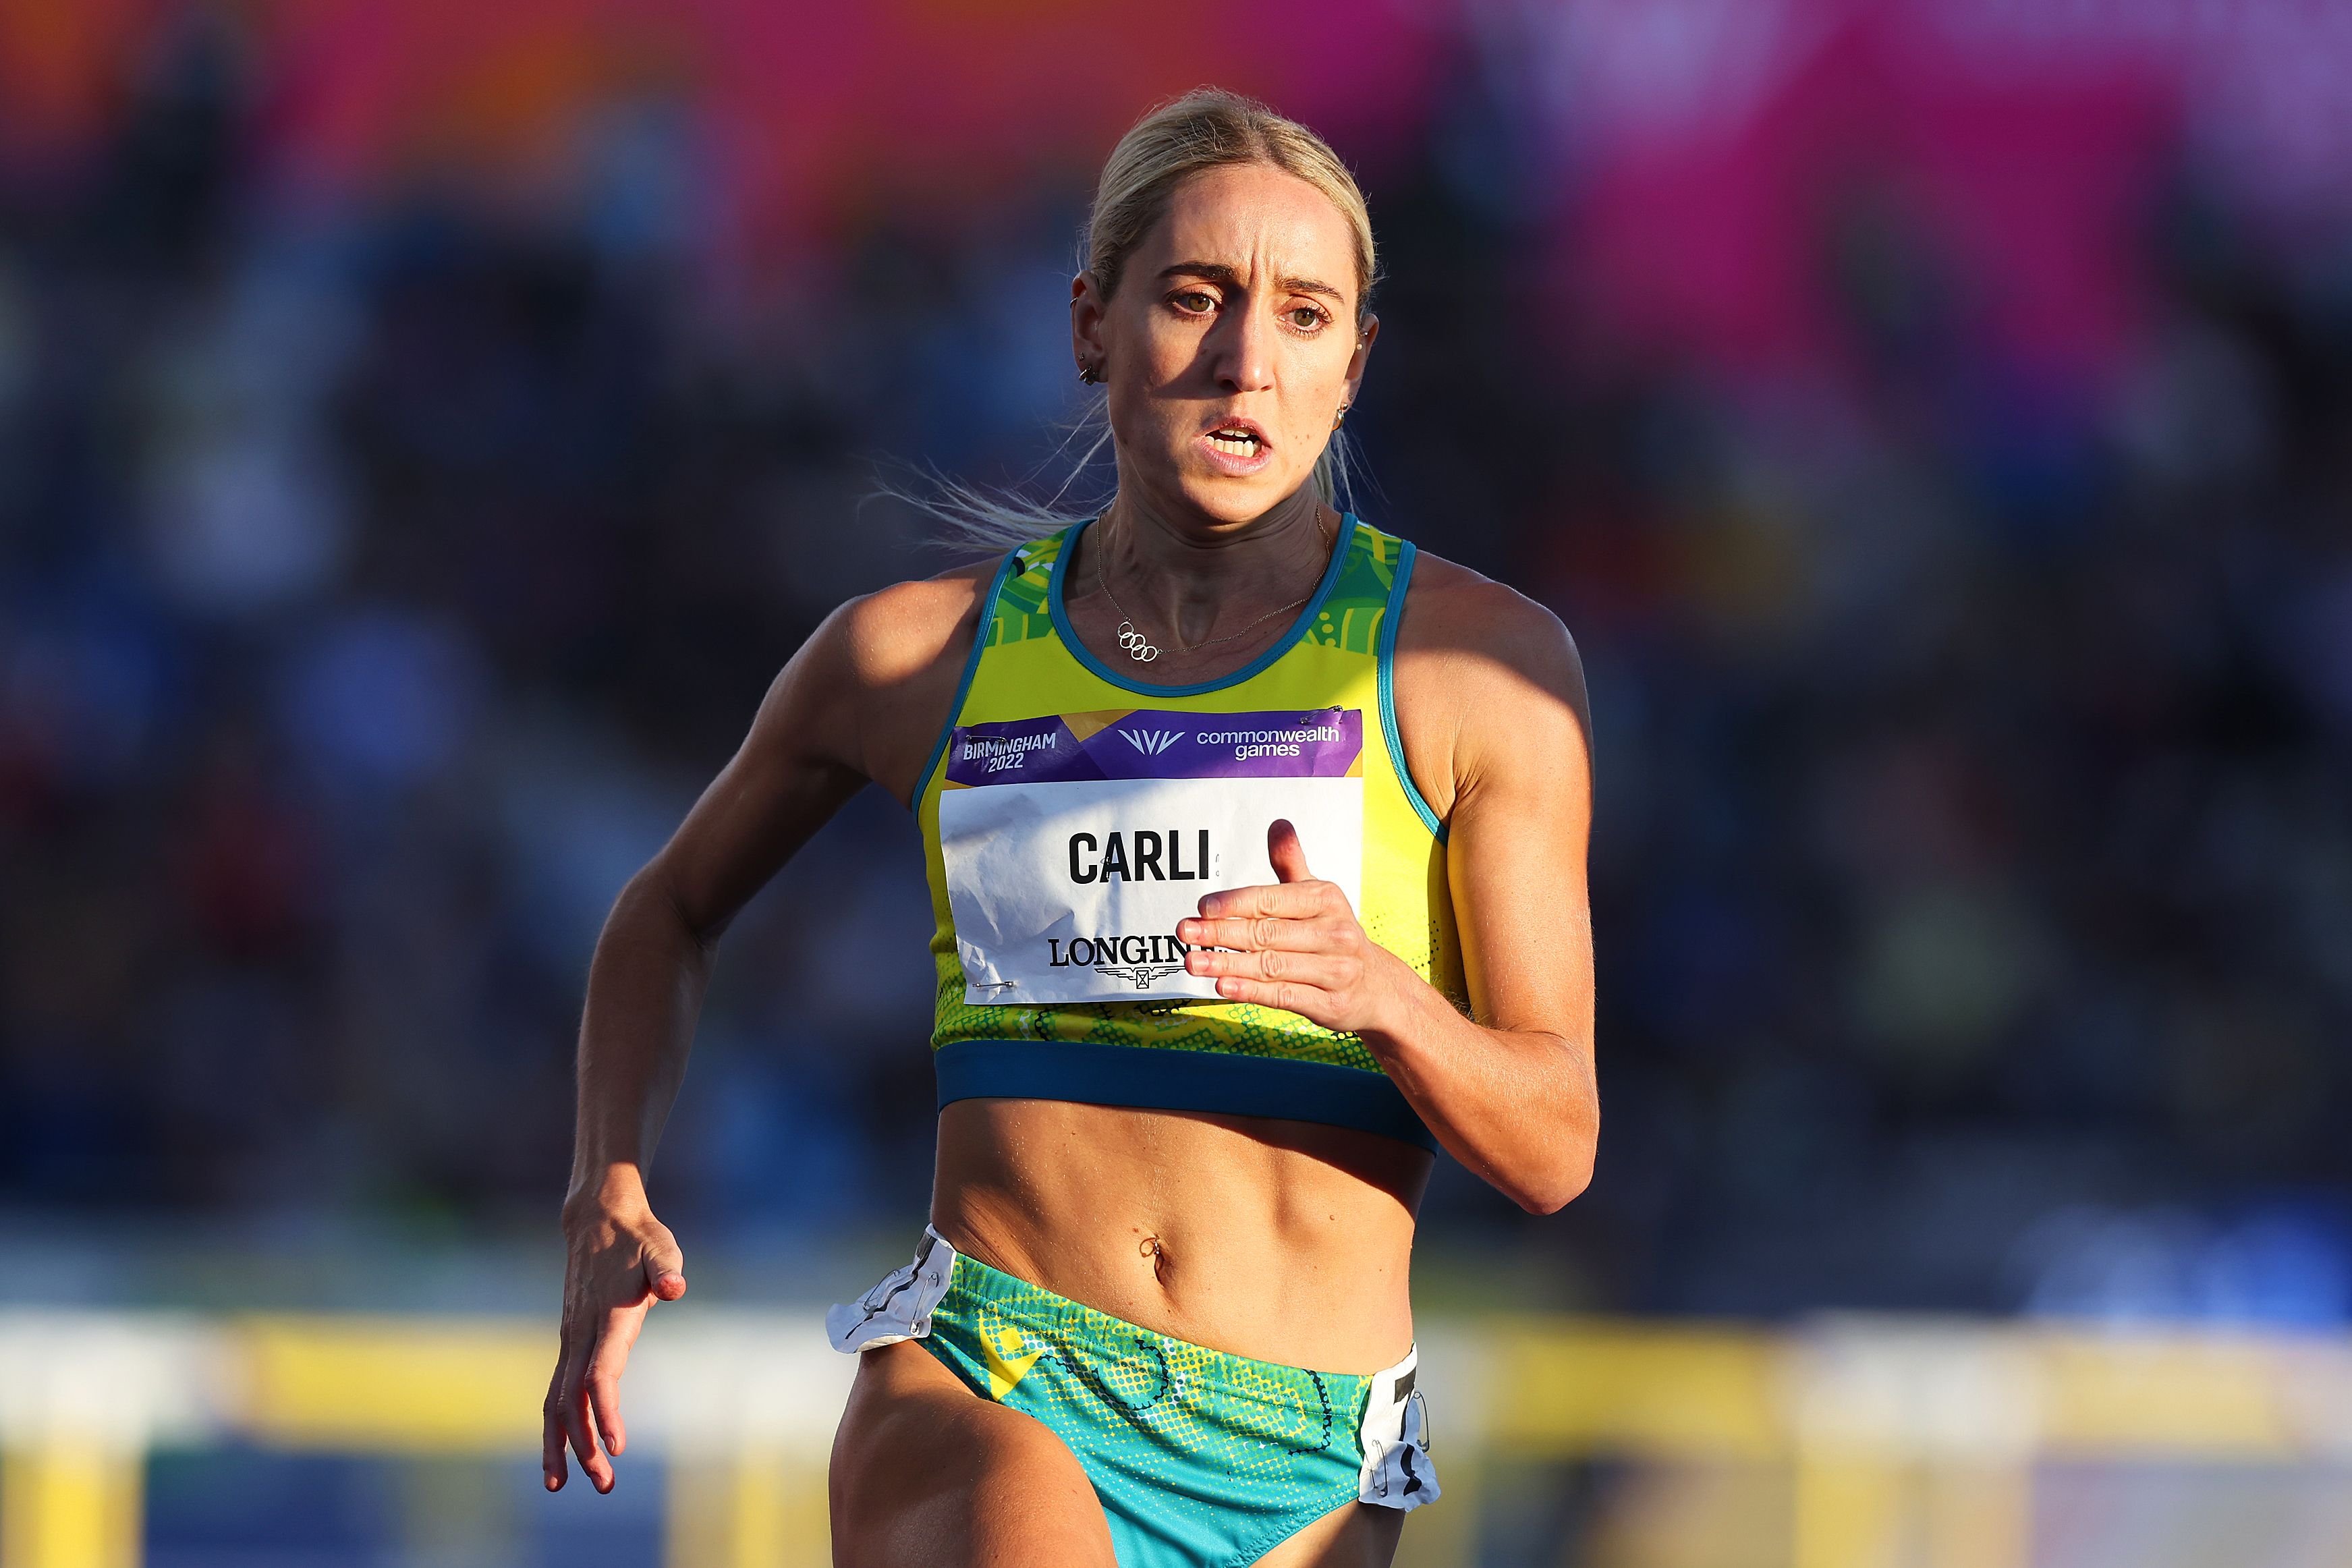 Sarah Carli competes at the Commonwealth Games in Birmingham